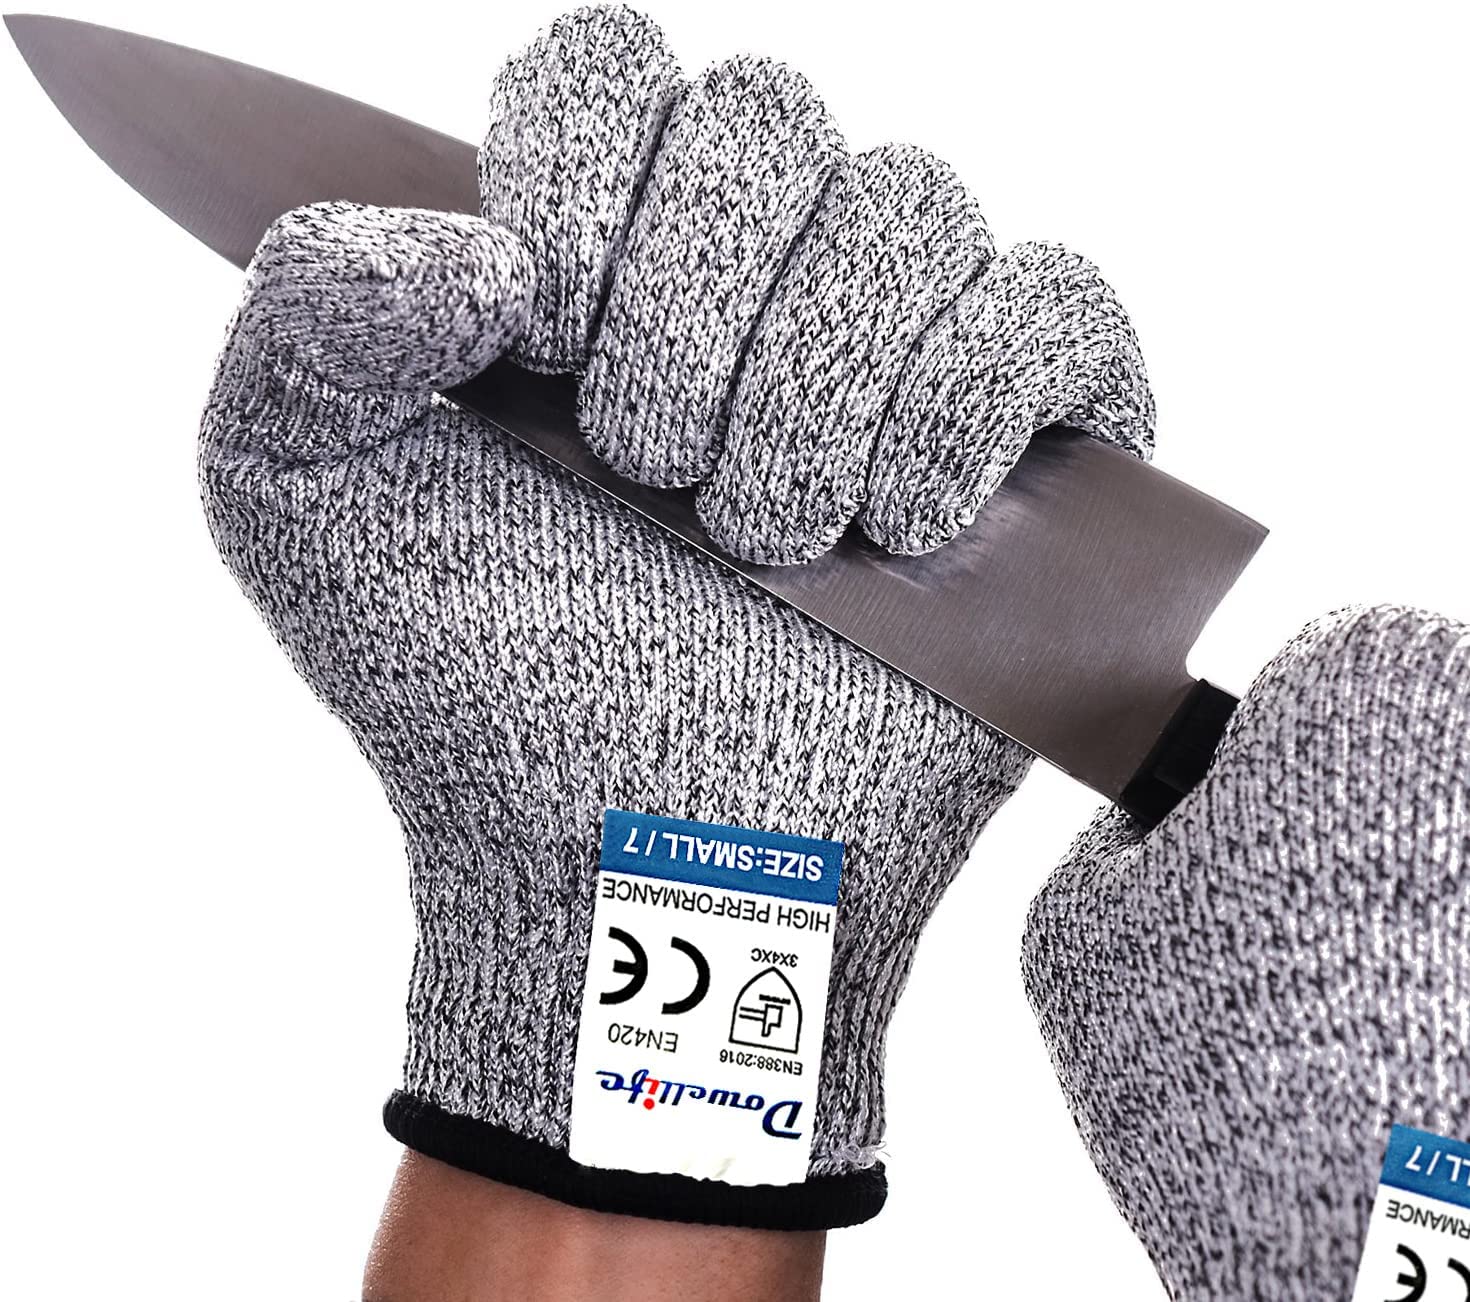 Dowellife Cut Resistant Gloves - Best Kitchen Gloves for Cutting